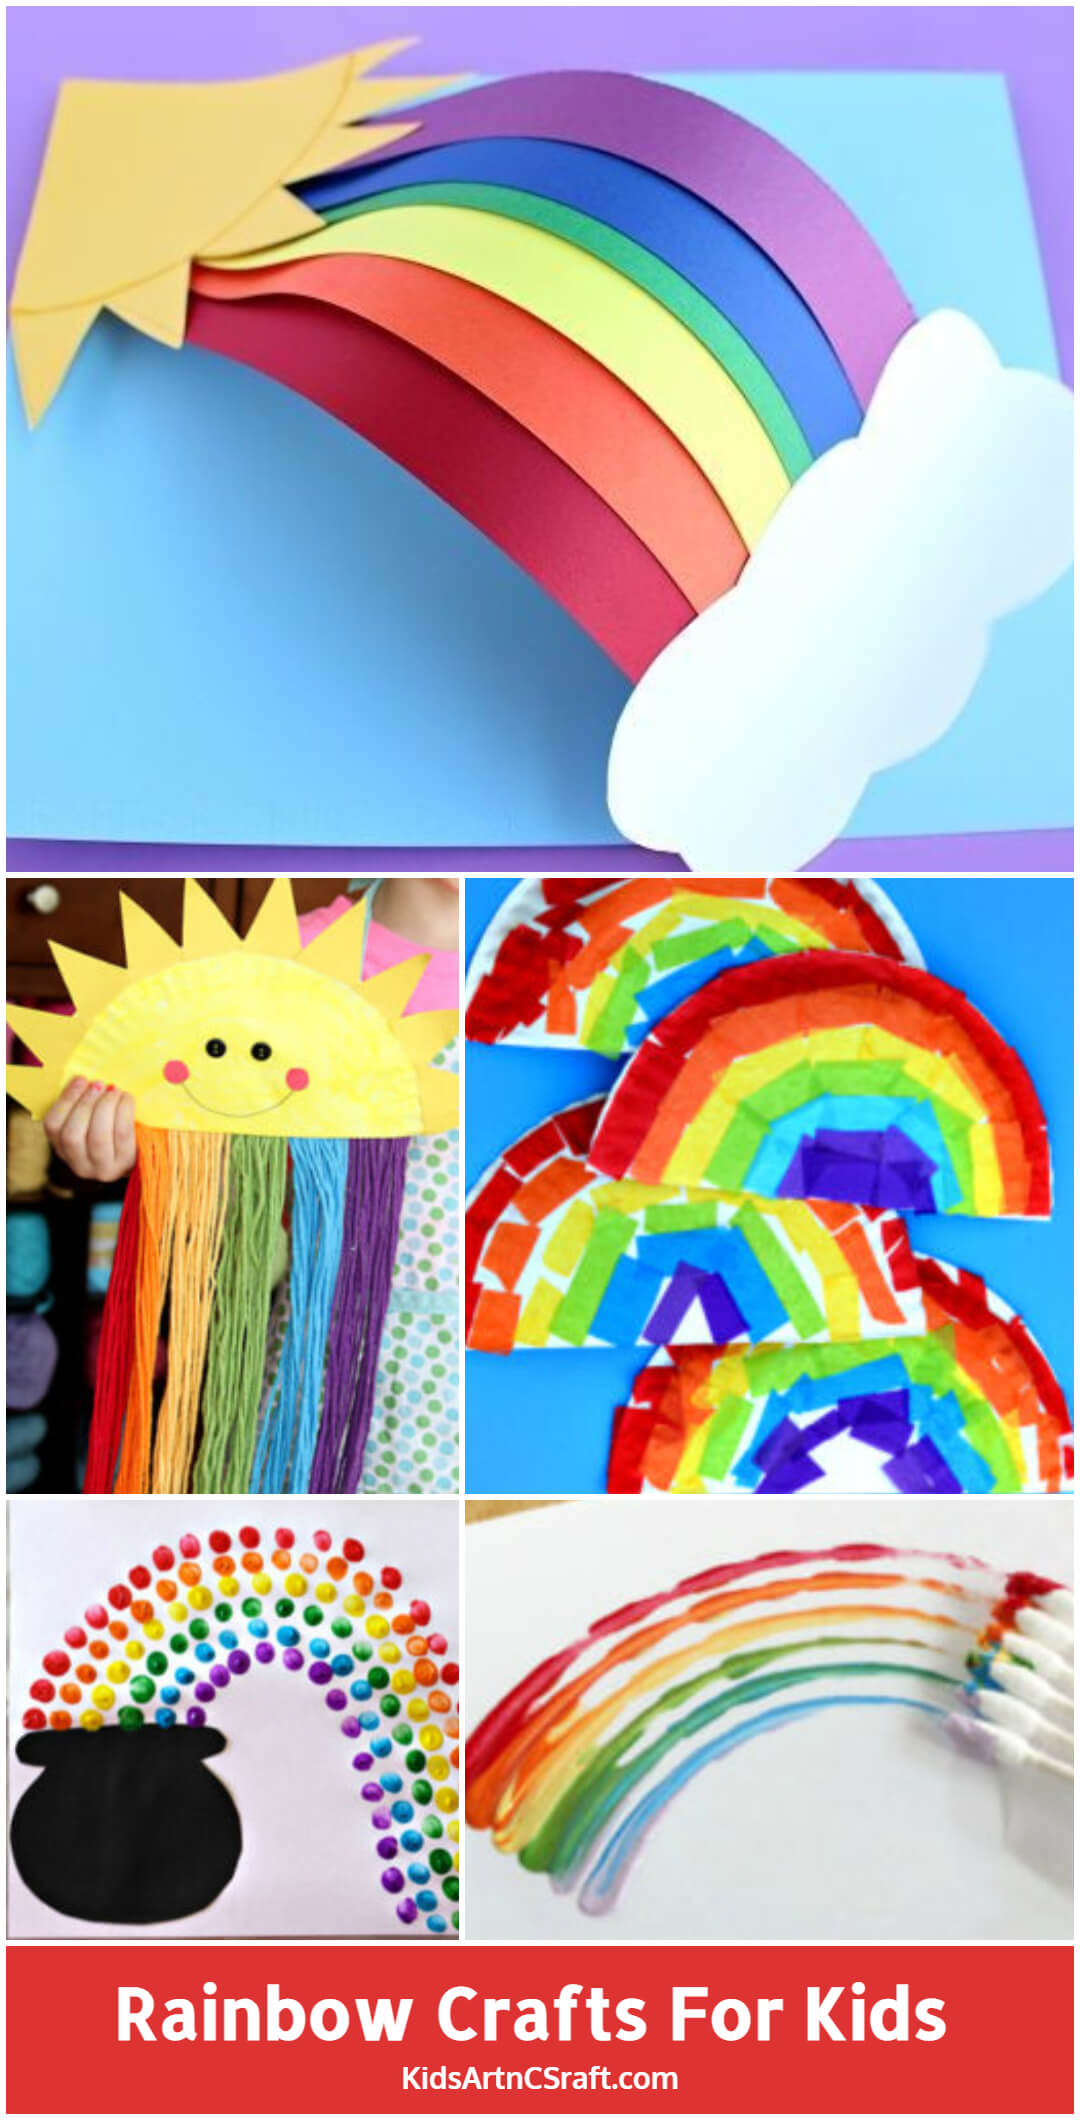 20+ Rainbow Crafts and Activities for Kids